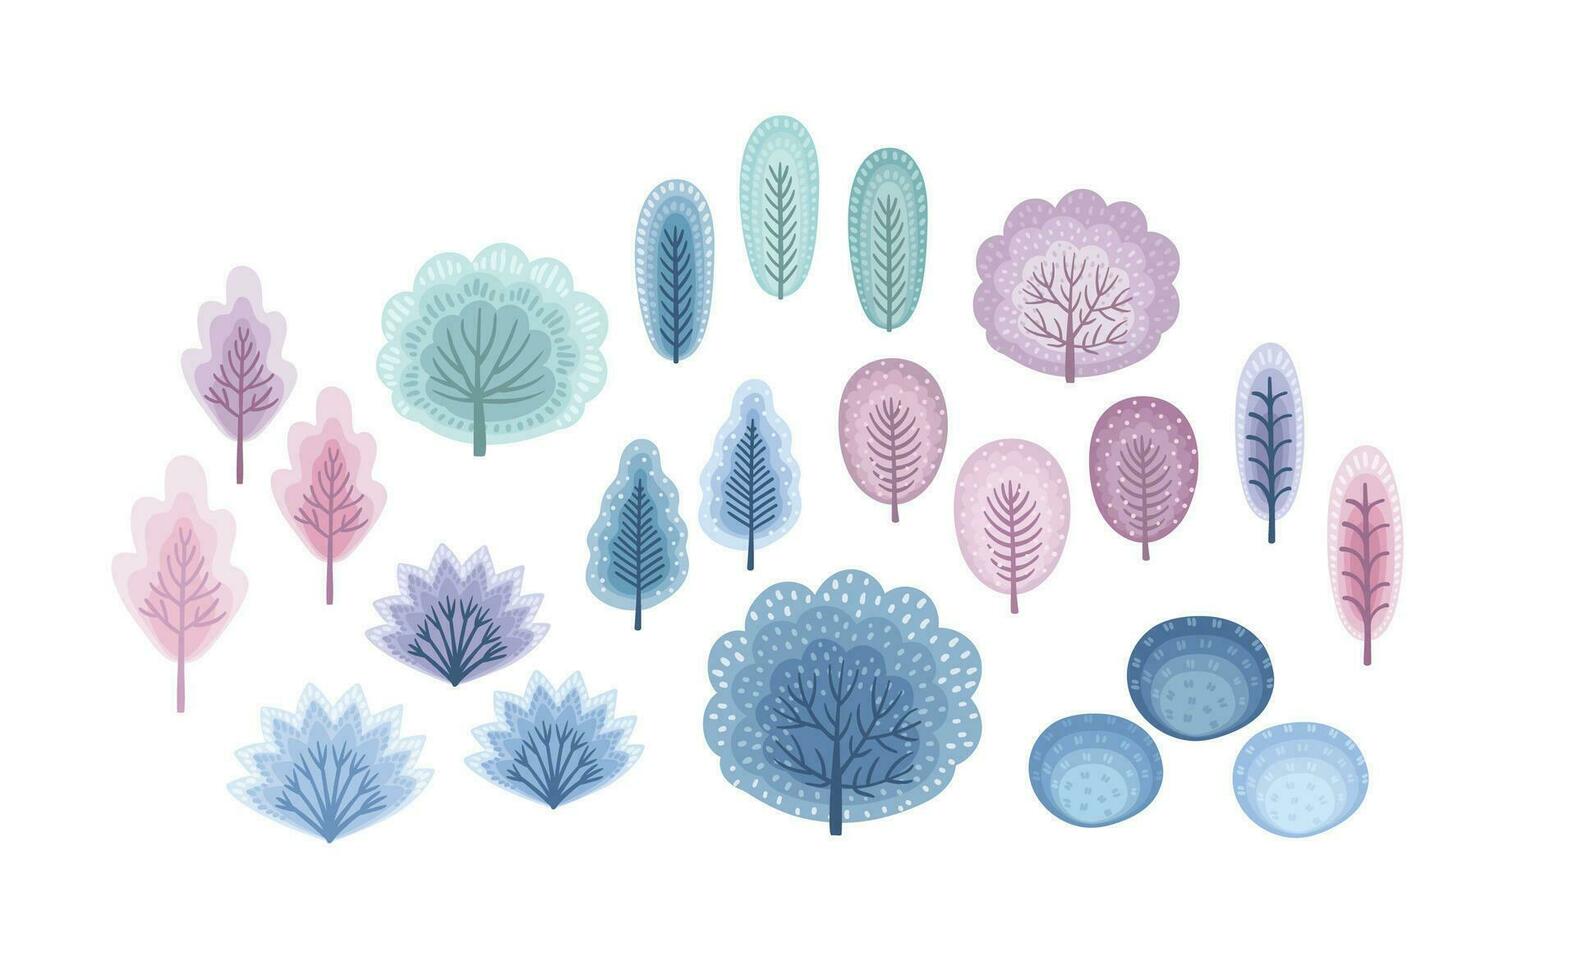 Isolated illustration of winter trees. Vector elements for card, poster, flyer, shop window, cover and other use.